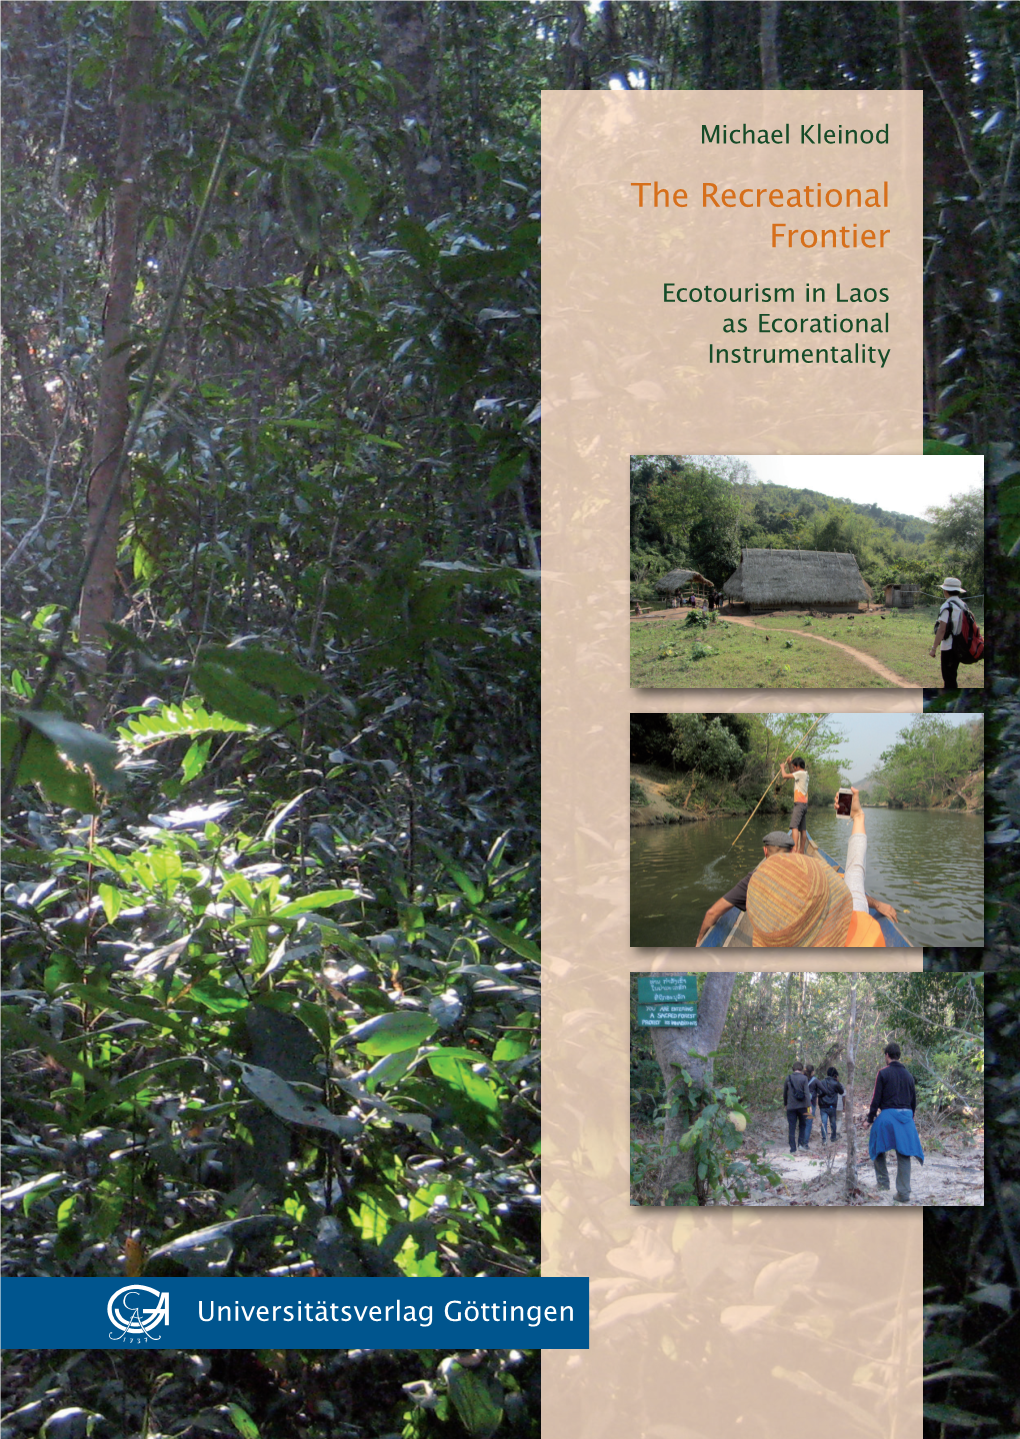 Ecotourism in Laos As Ecorational Instrumentality